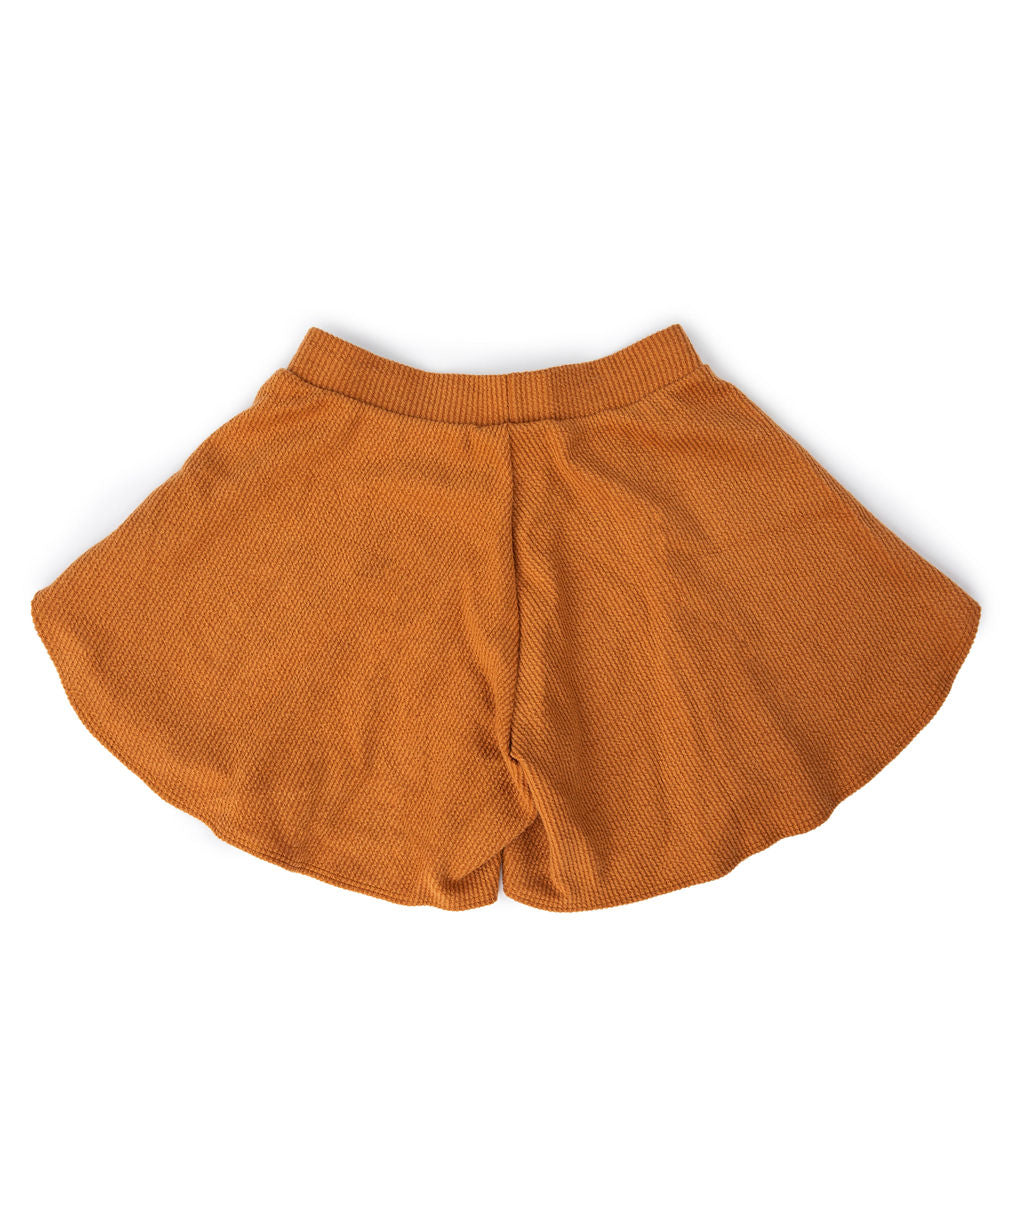 Pull on and flow. These flowy shorts are inspired by hot AF Arizona days when pants are too much to bear. The anti-jeans. With ribbed cotton and an elastic waistband, they’re just the last-minute disguise your bikini bottoms need for your next adventure. Pop on the matching crop top and you’re all set! Created by PUNKWASP